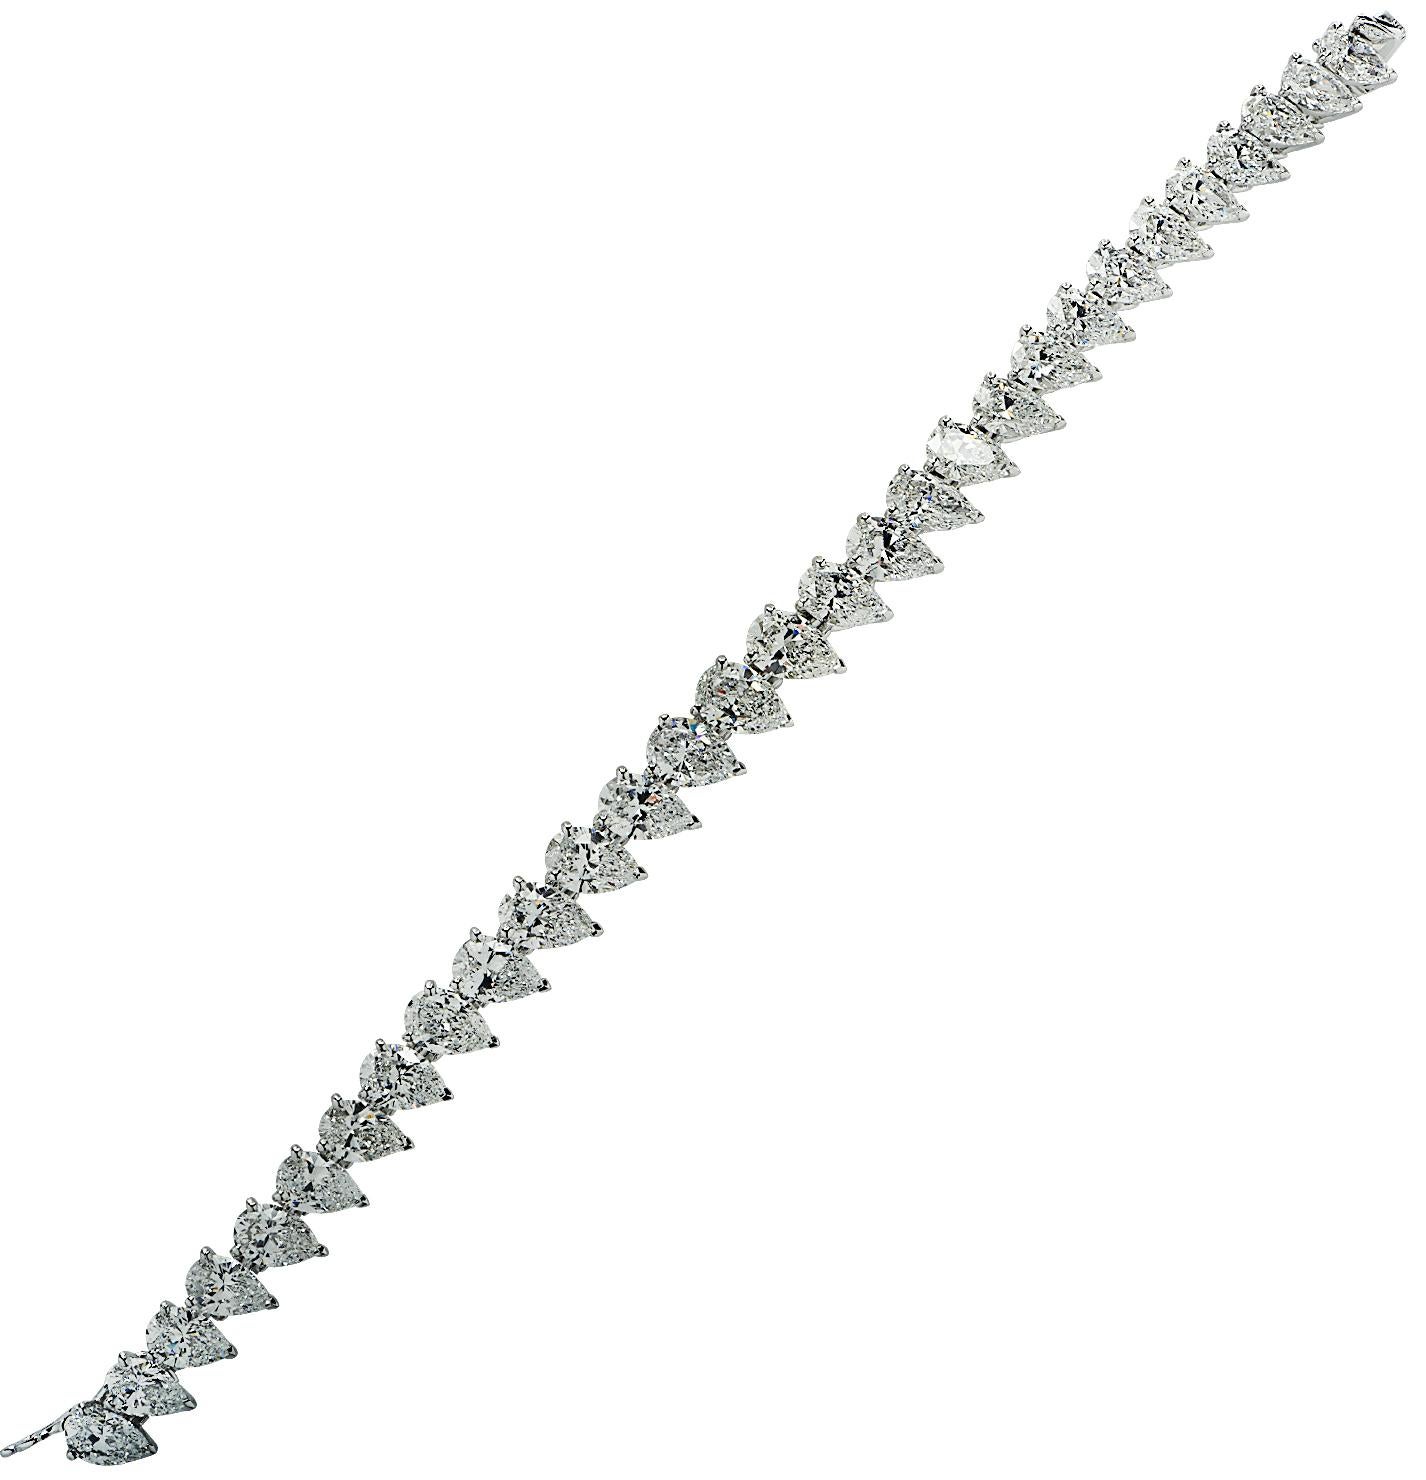 From the House of Cartier, this sensational straight line diamond bracelet, crafted in platinum, features 30 Pear shaped diamonds weighing approximately 23.70 carats total, D-F color, VVS-VS clarity. The diamonds are seamlessly set in 3 prong claws